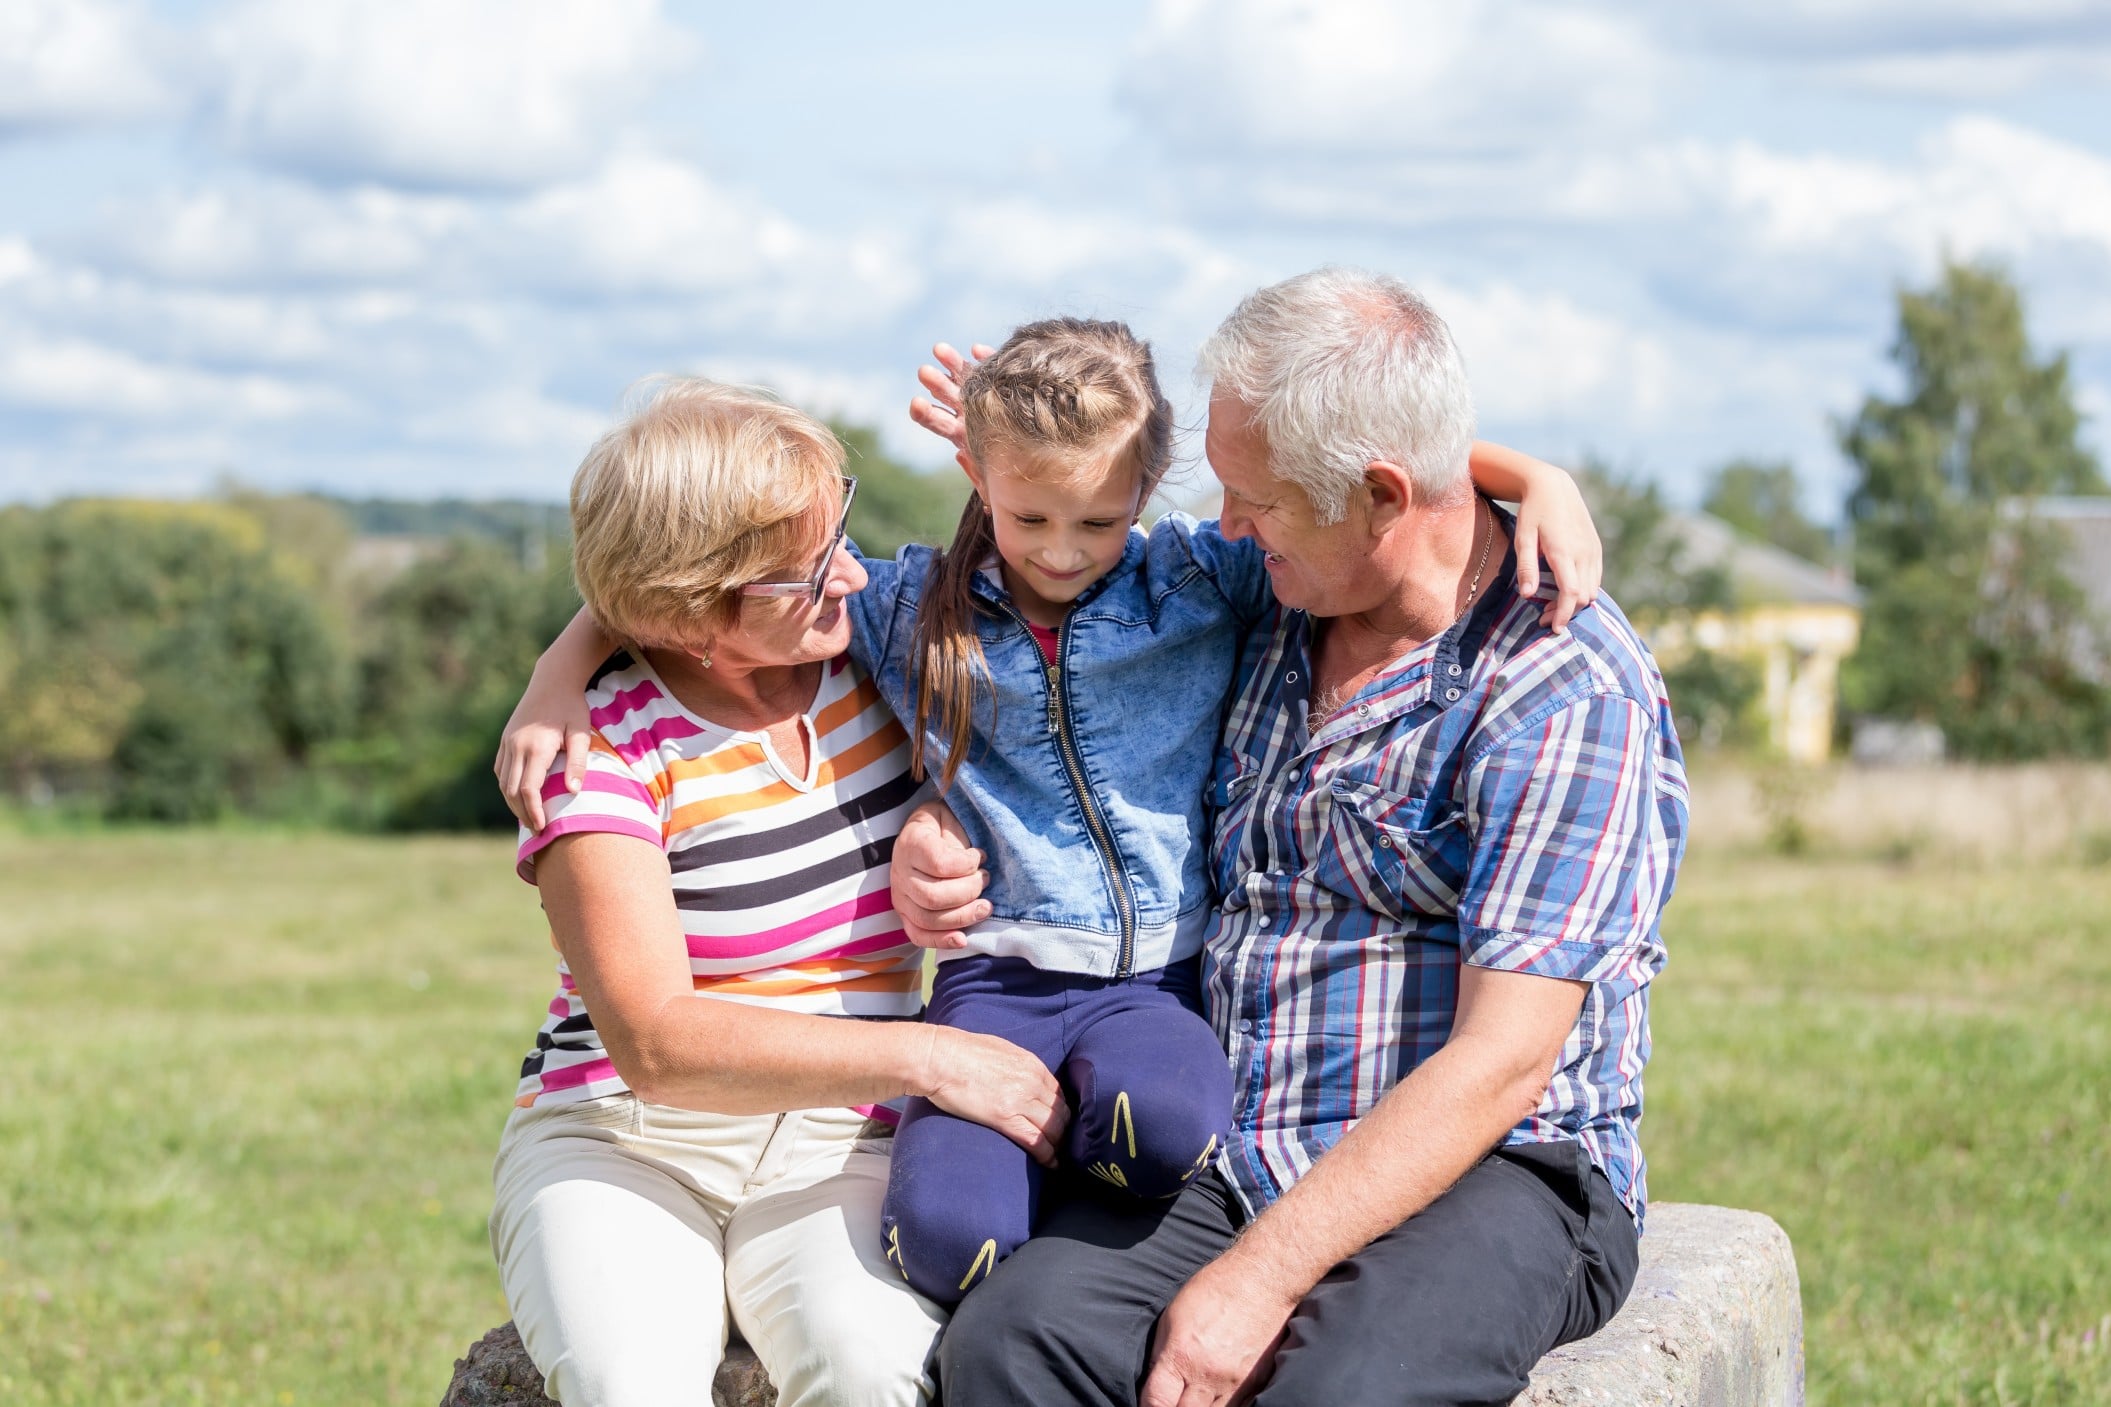 Grandparents with Granddaughter in a grassy field on a sunny day